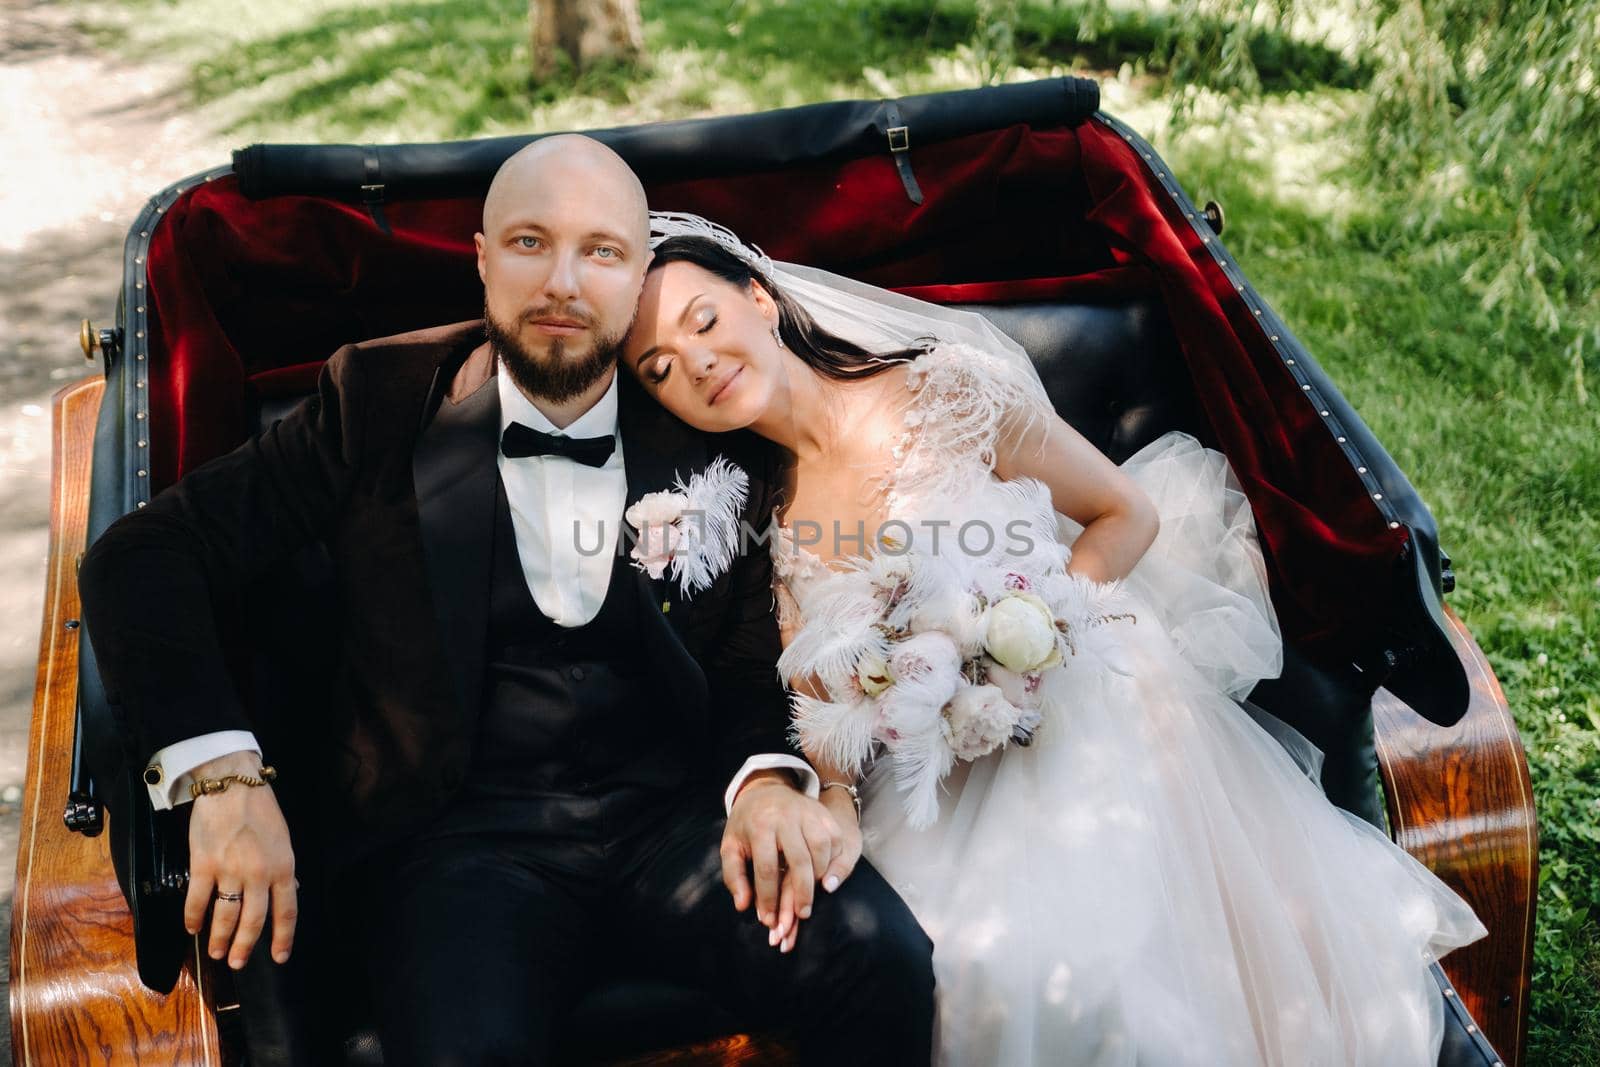 The bride and groom with a bouquet are sitting in a carriage in nature in retro style.